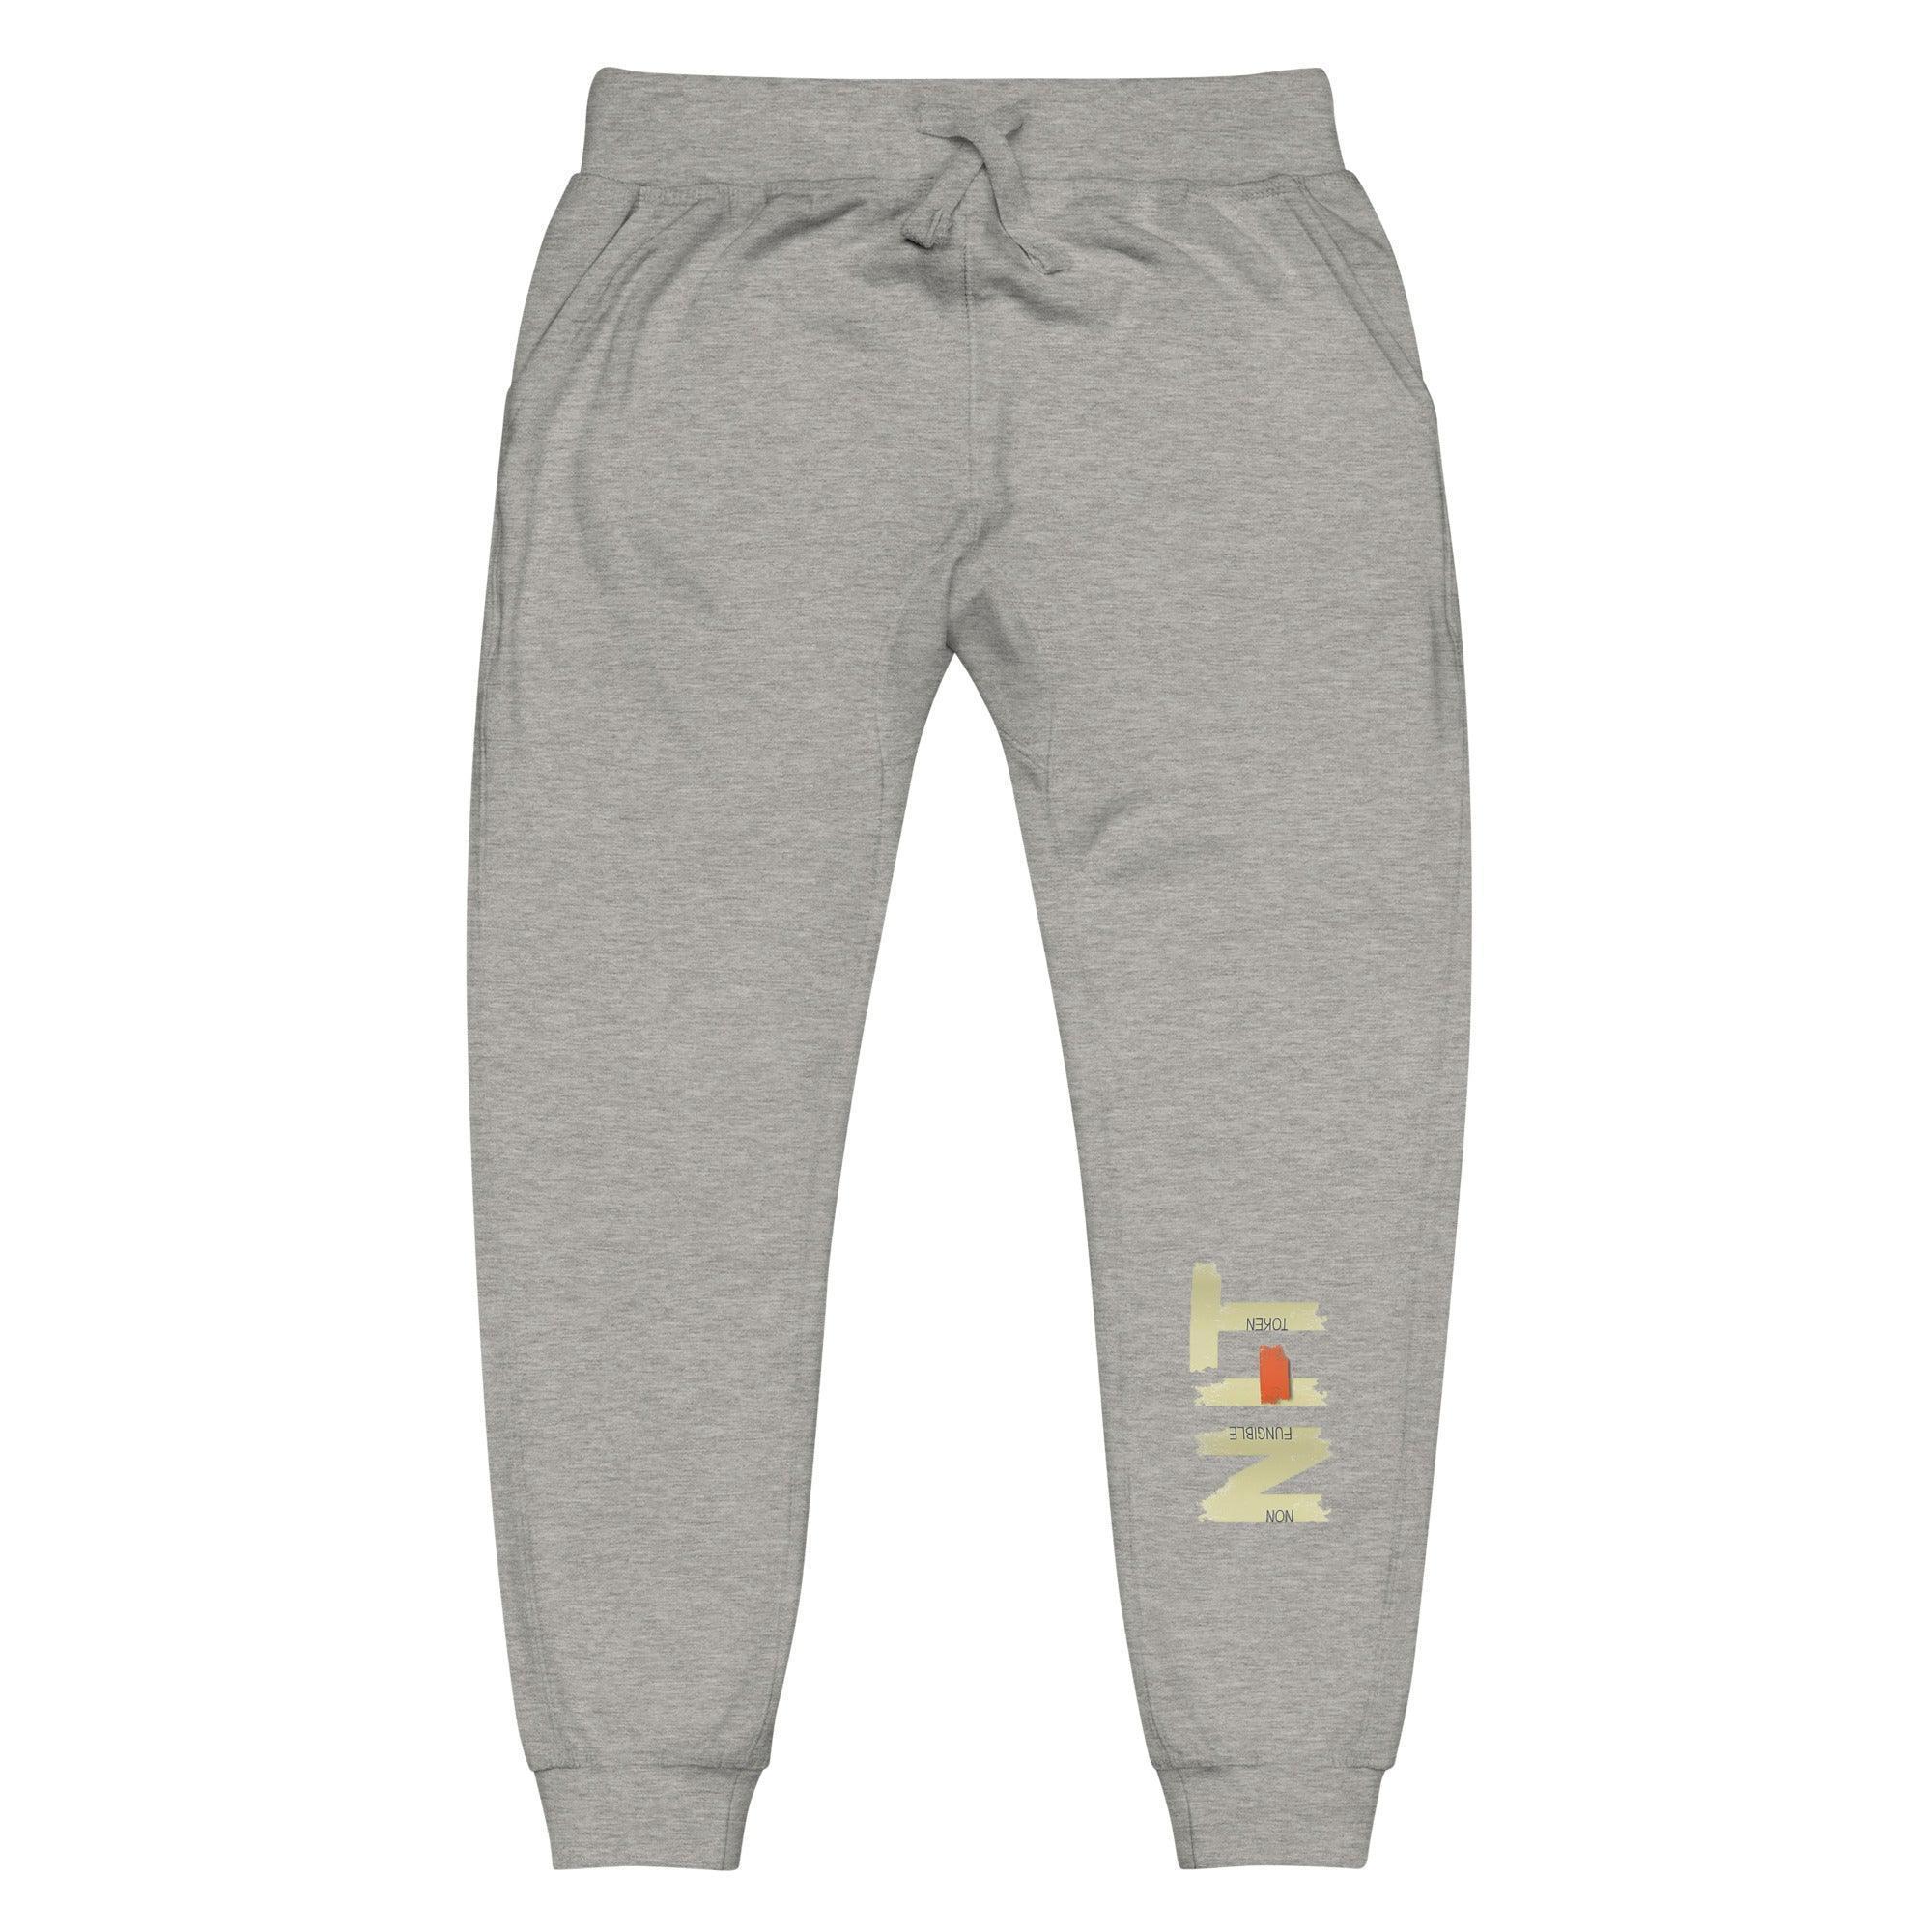 NFT | Non Fungible Token Sweatpants - InvestmenTees